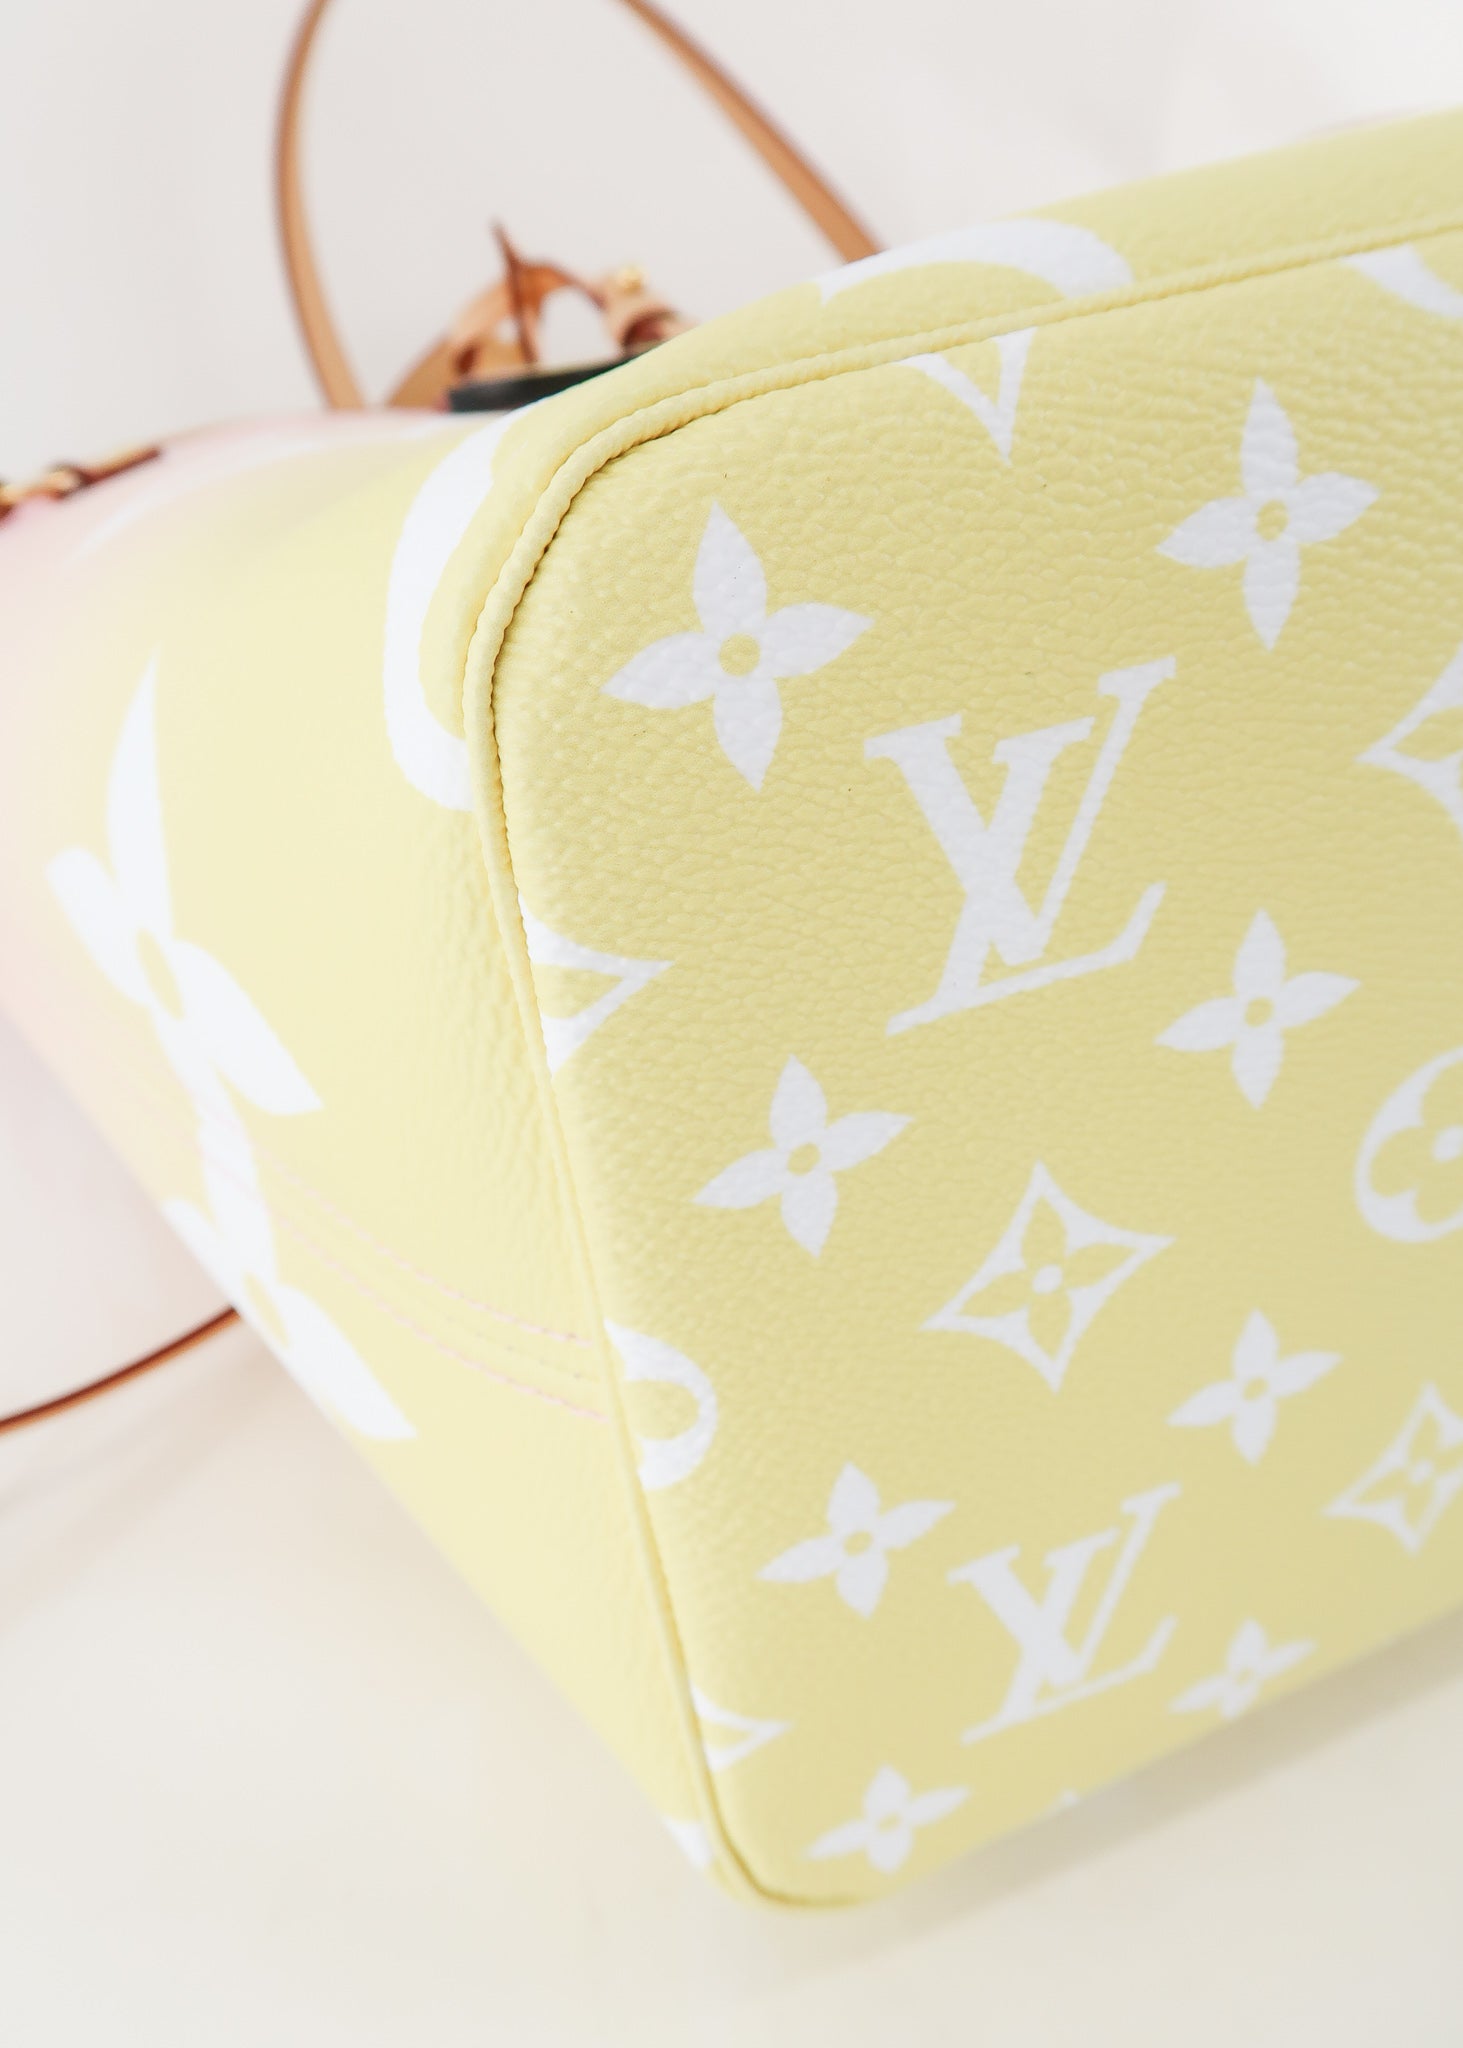 Louis Vuitton Neverfull Monogram Giant MM Lilac/Yellow Lining in